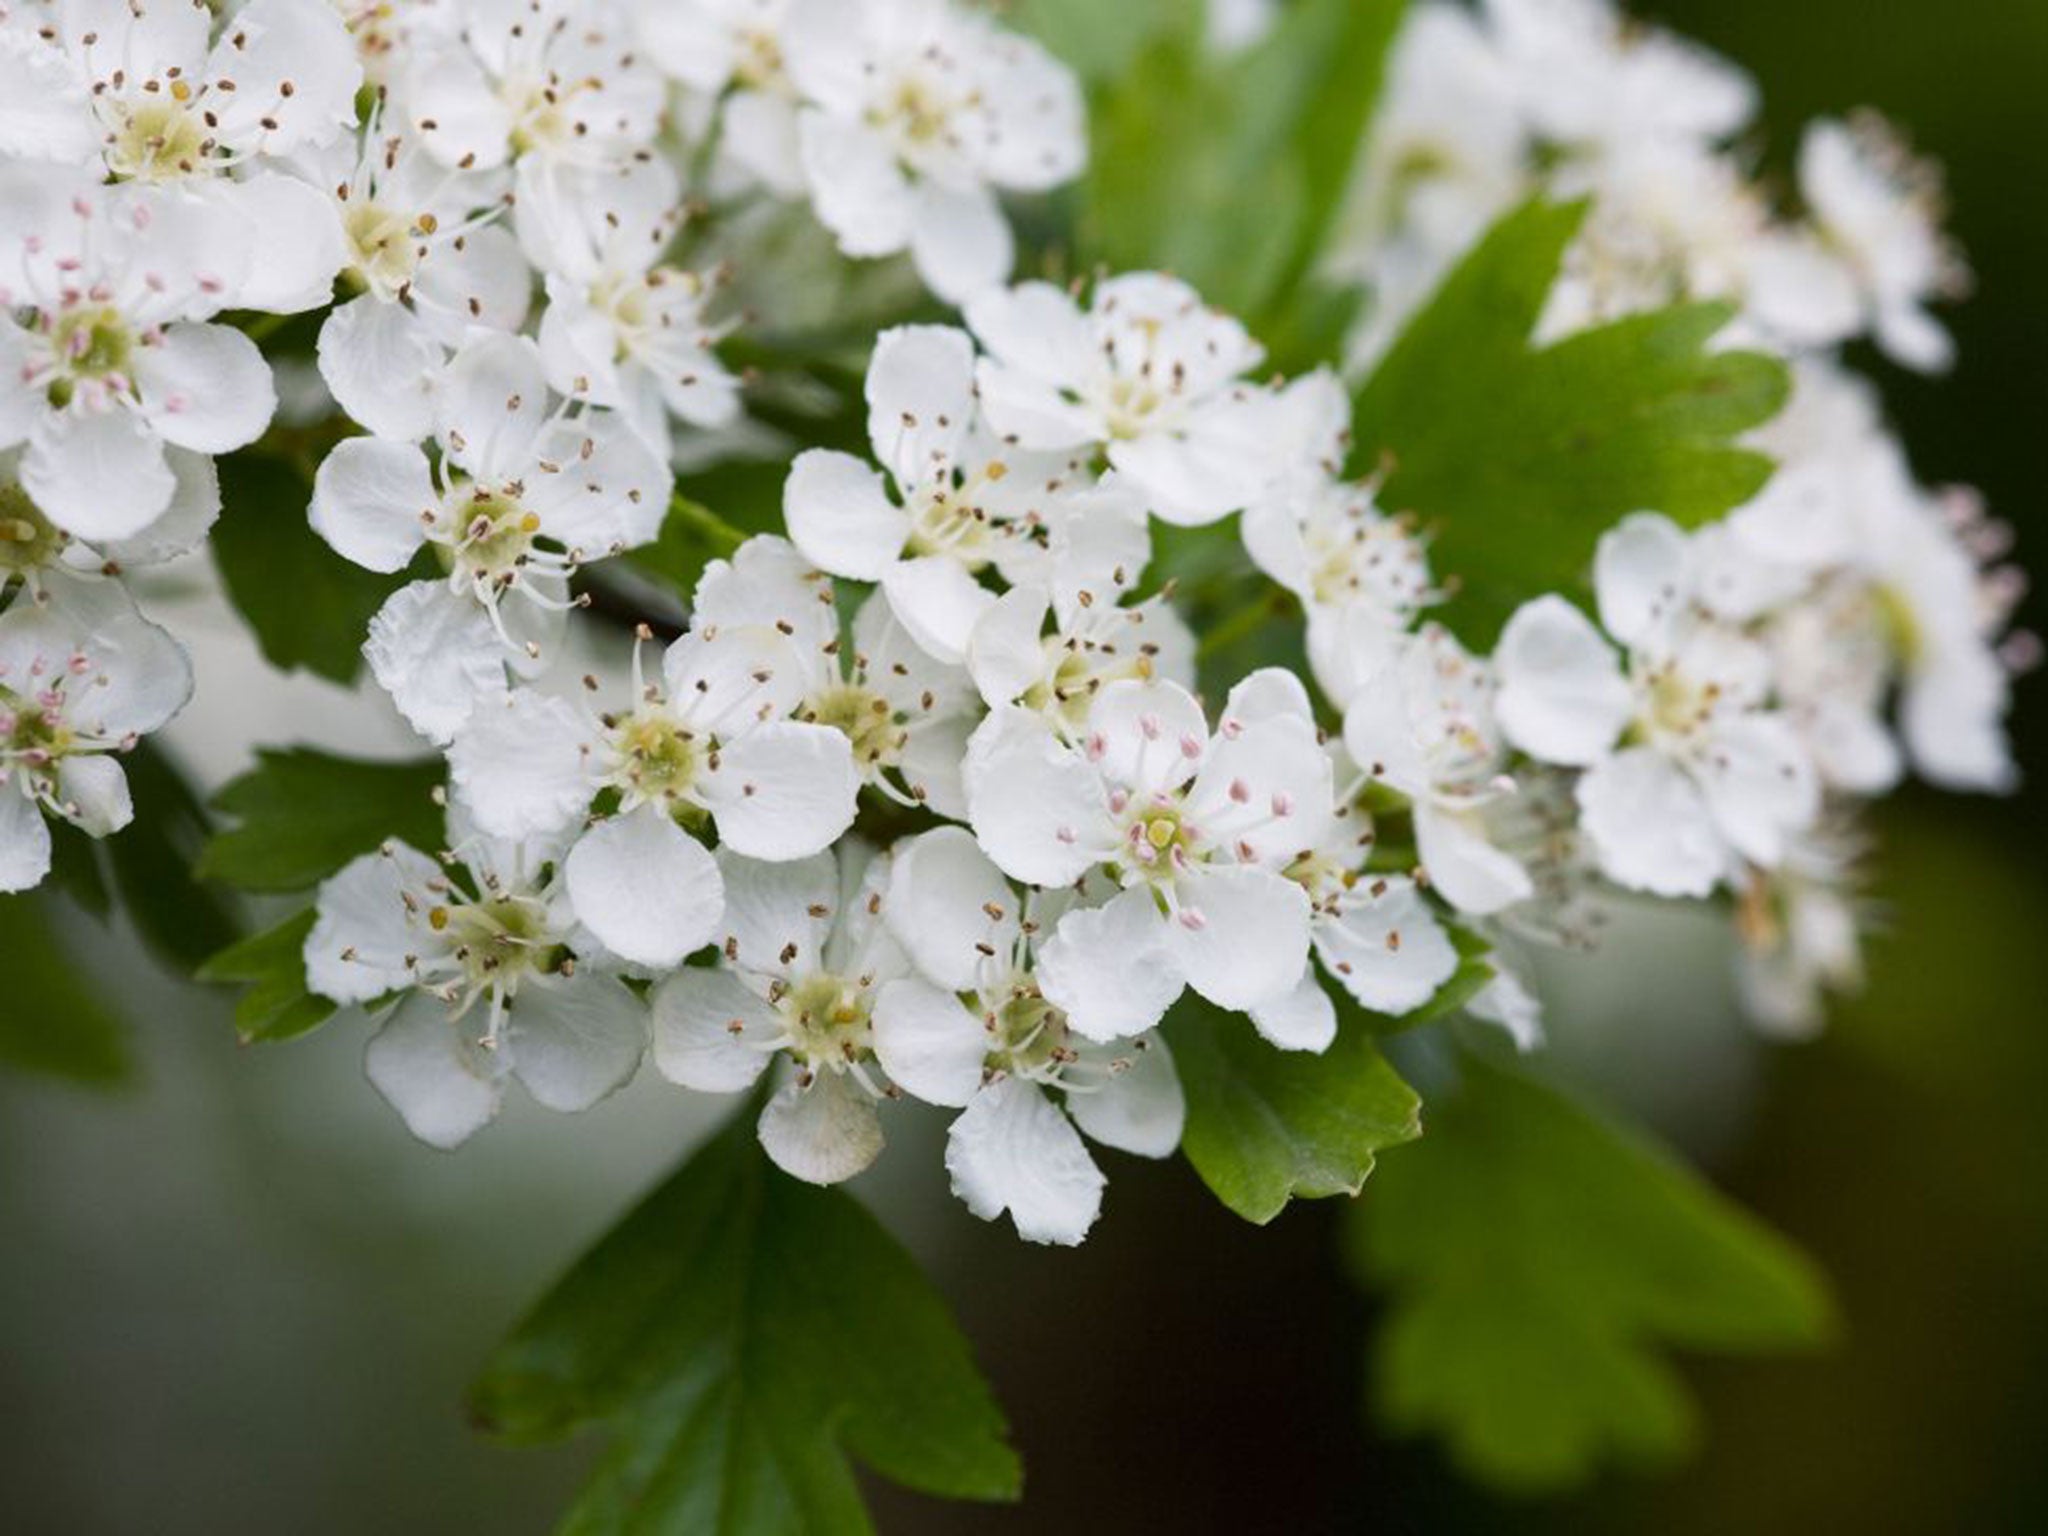 Hawthorn has been spotted in flower at New Year, a whole five months earlier than expected